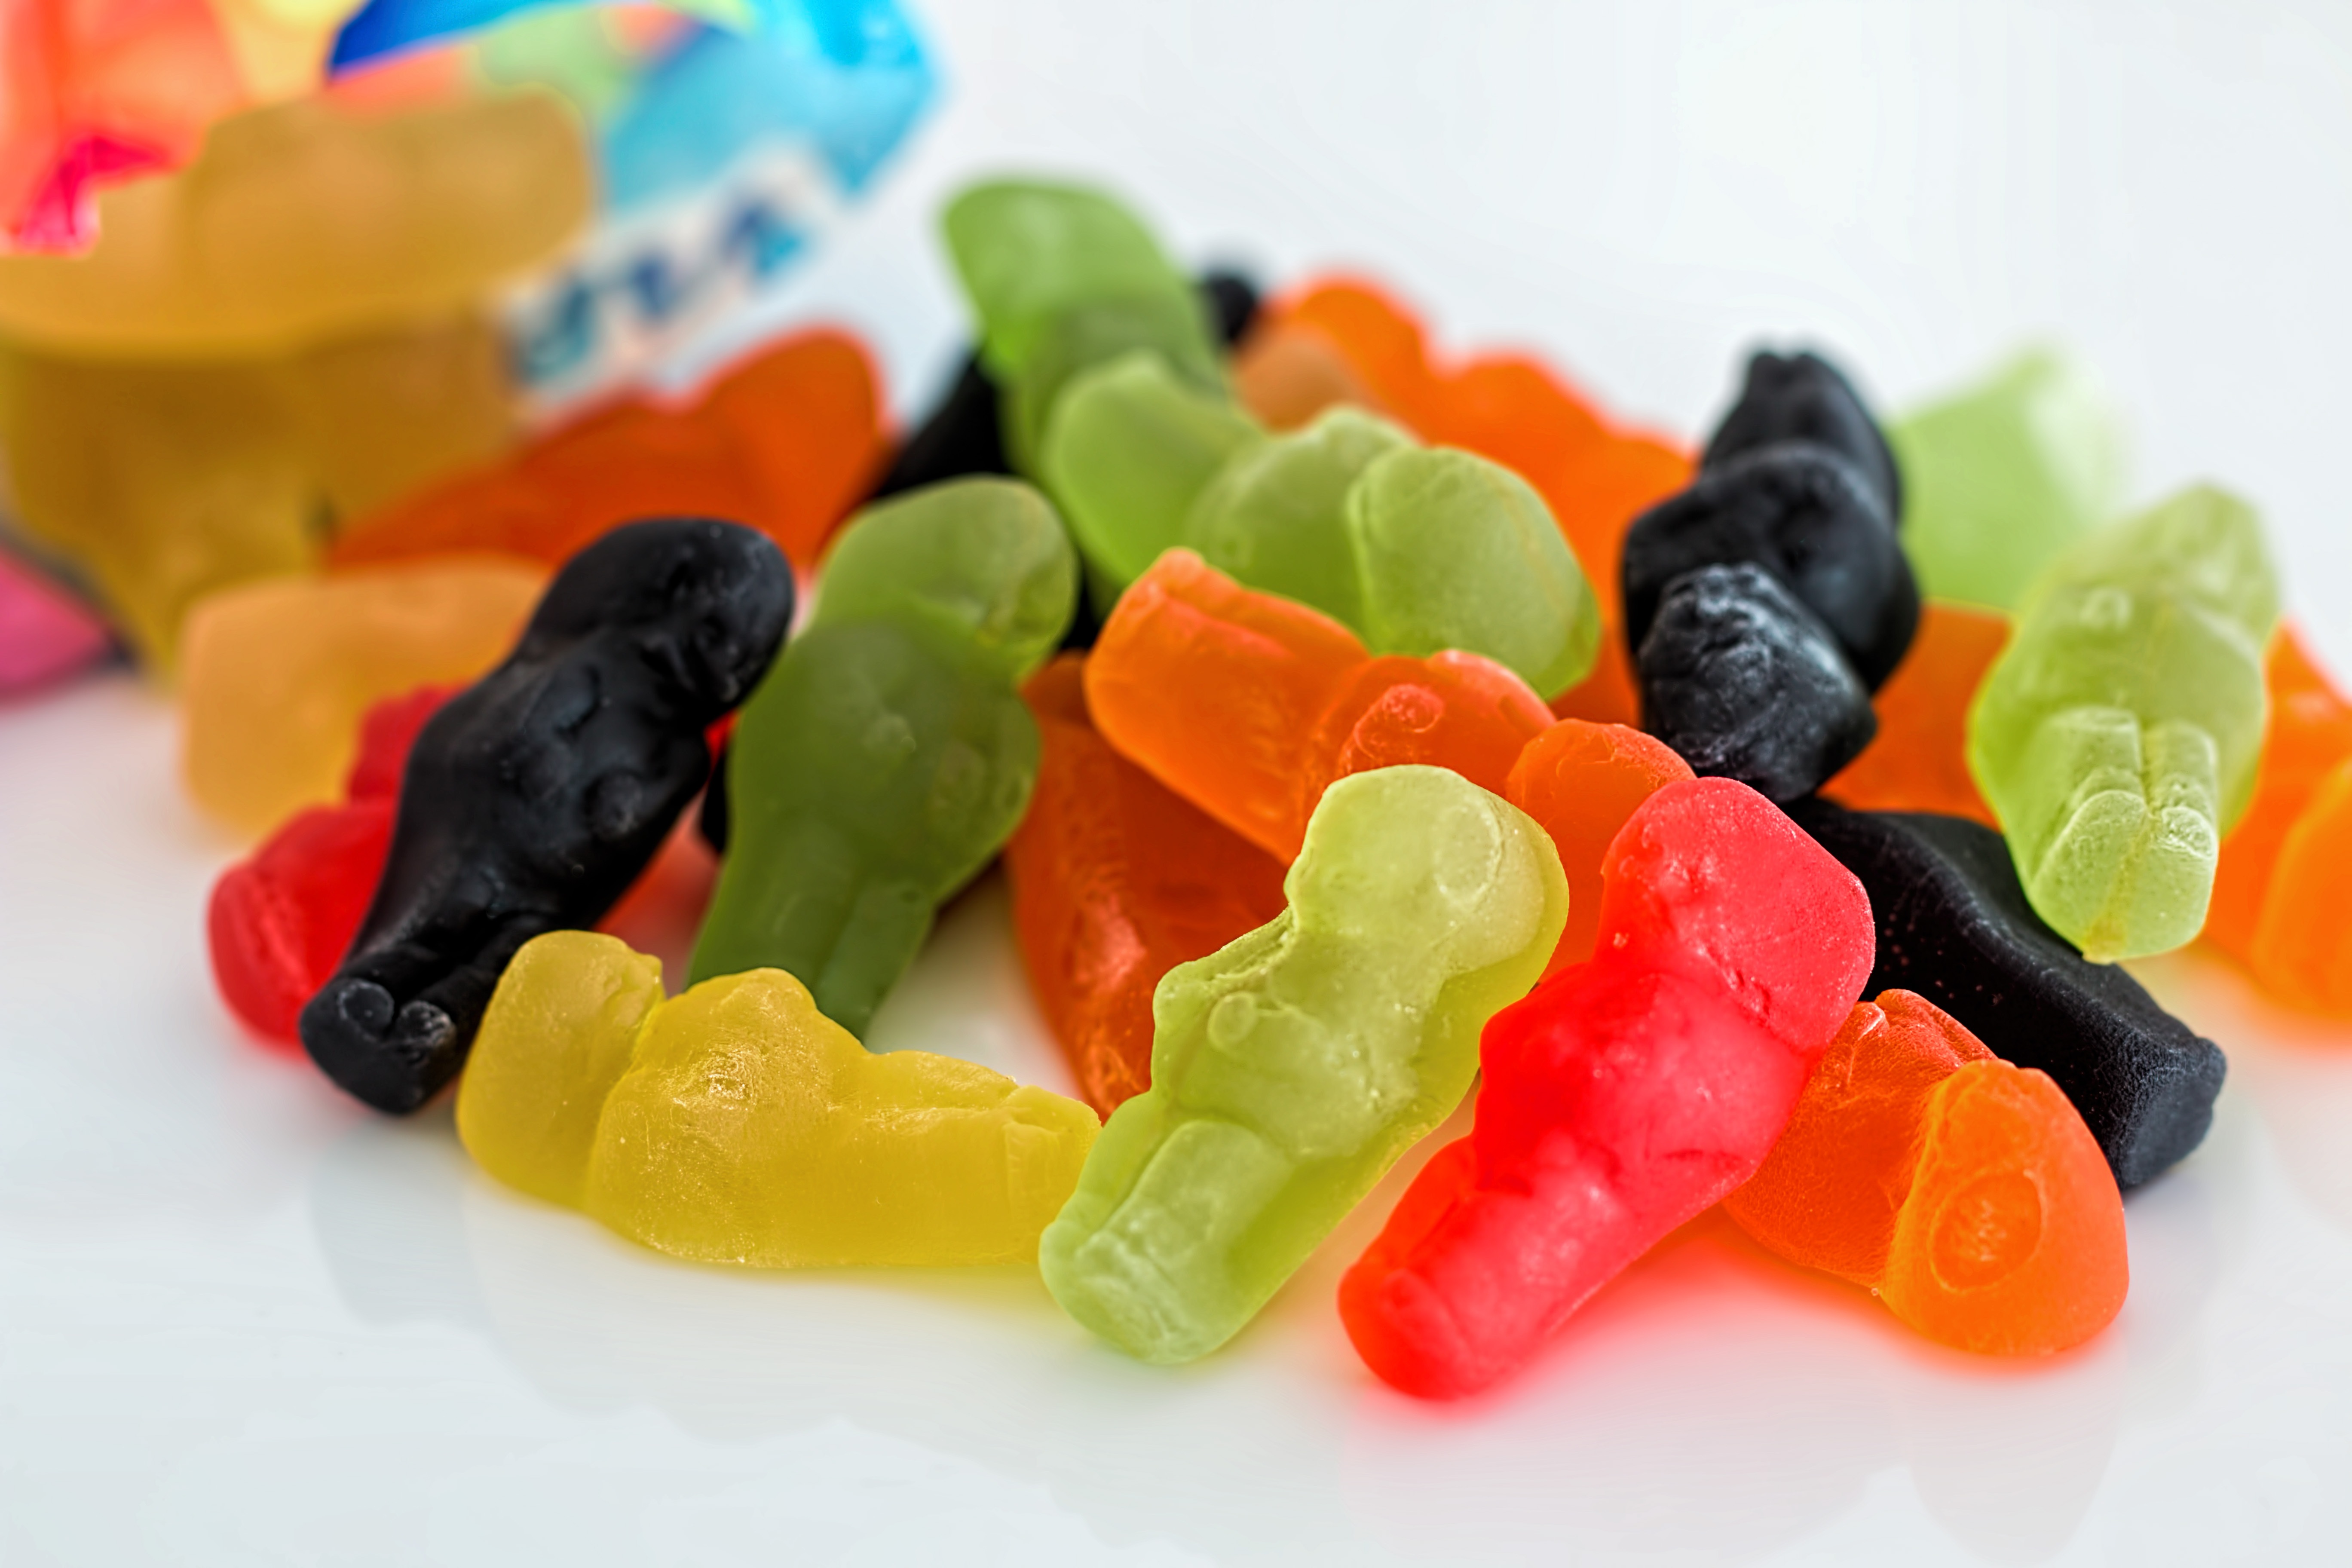 jelly-babies-gum-babies-sweets-candy-39527.jpeg